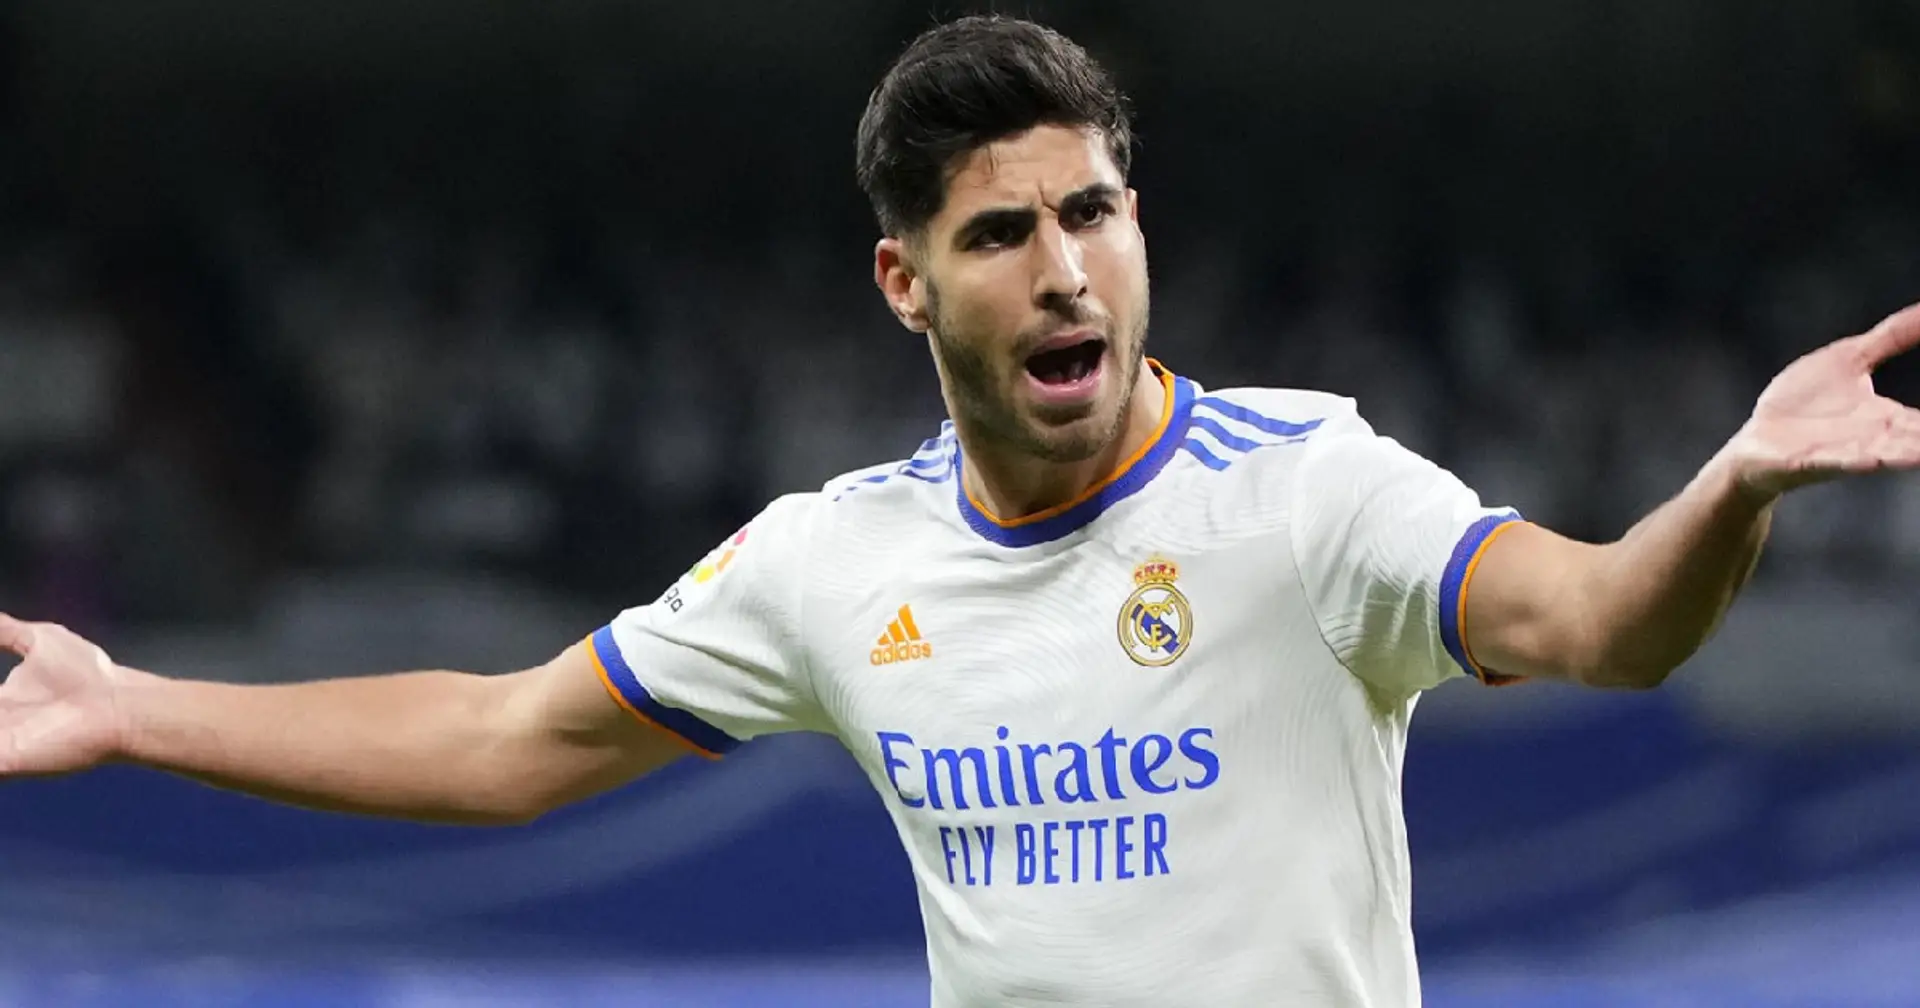 Stat of the day: only one player has scored more outside-the-box goals than Asensio in Europe this term